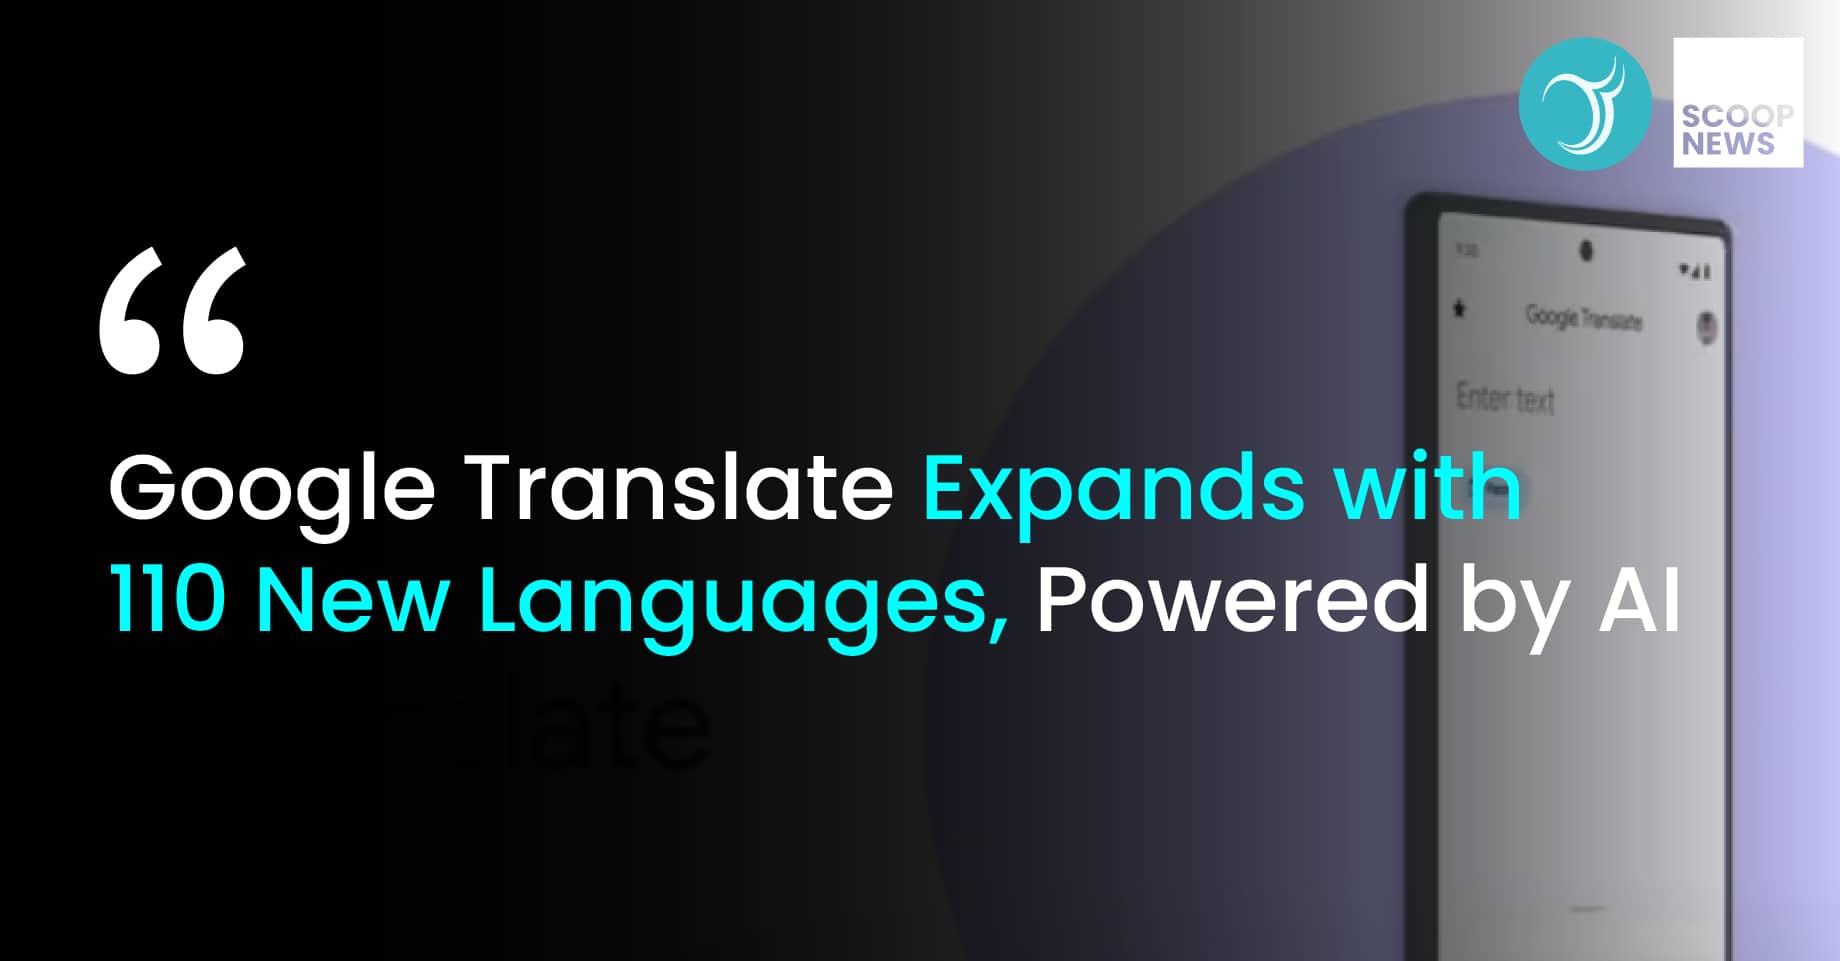 Google Translate Expands with 110 New Languages, Powered by AI